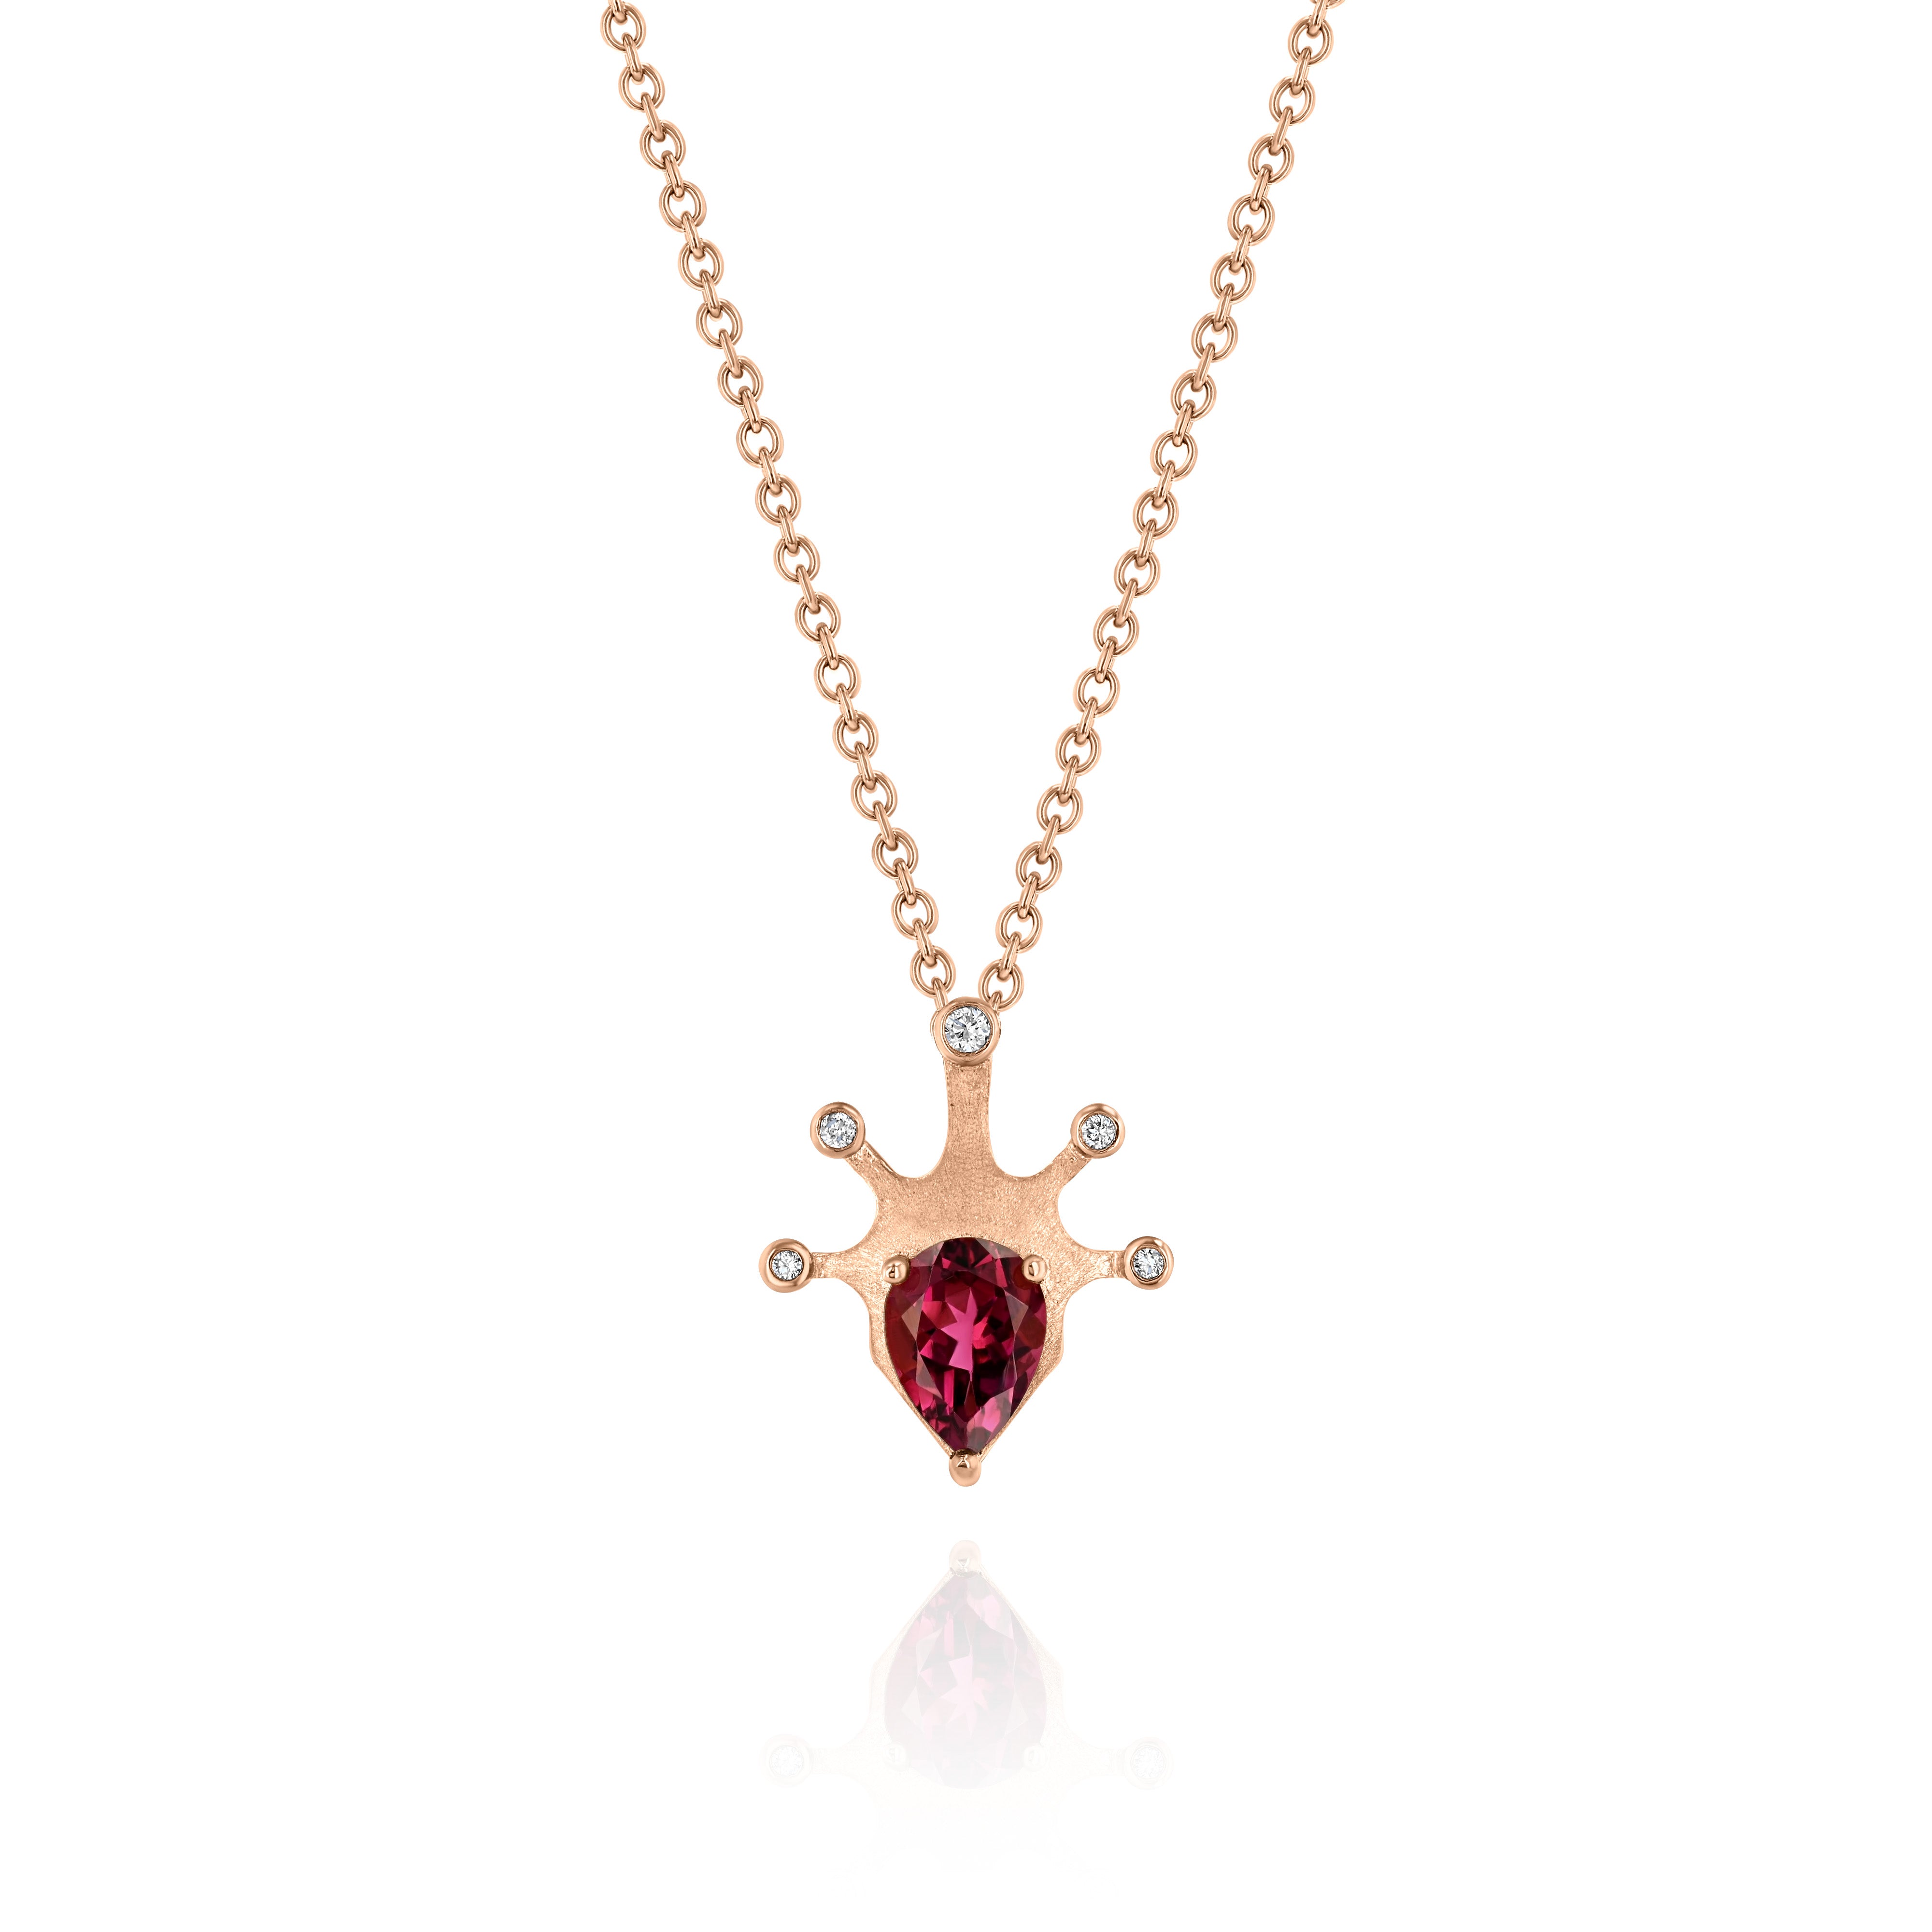 Rose Gold Necklace with a pear shaped Pink Tourmaline and small round Diamonds, Small